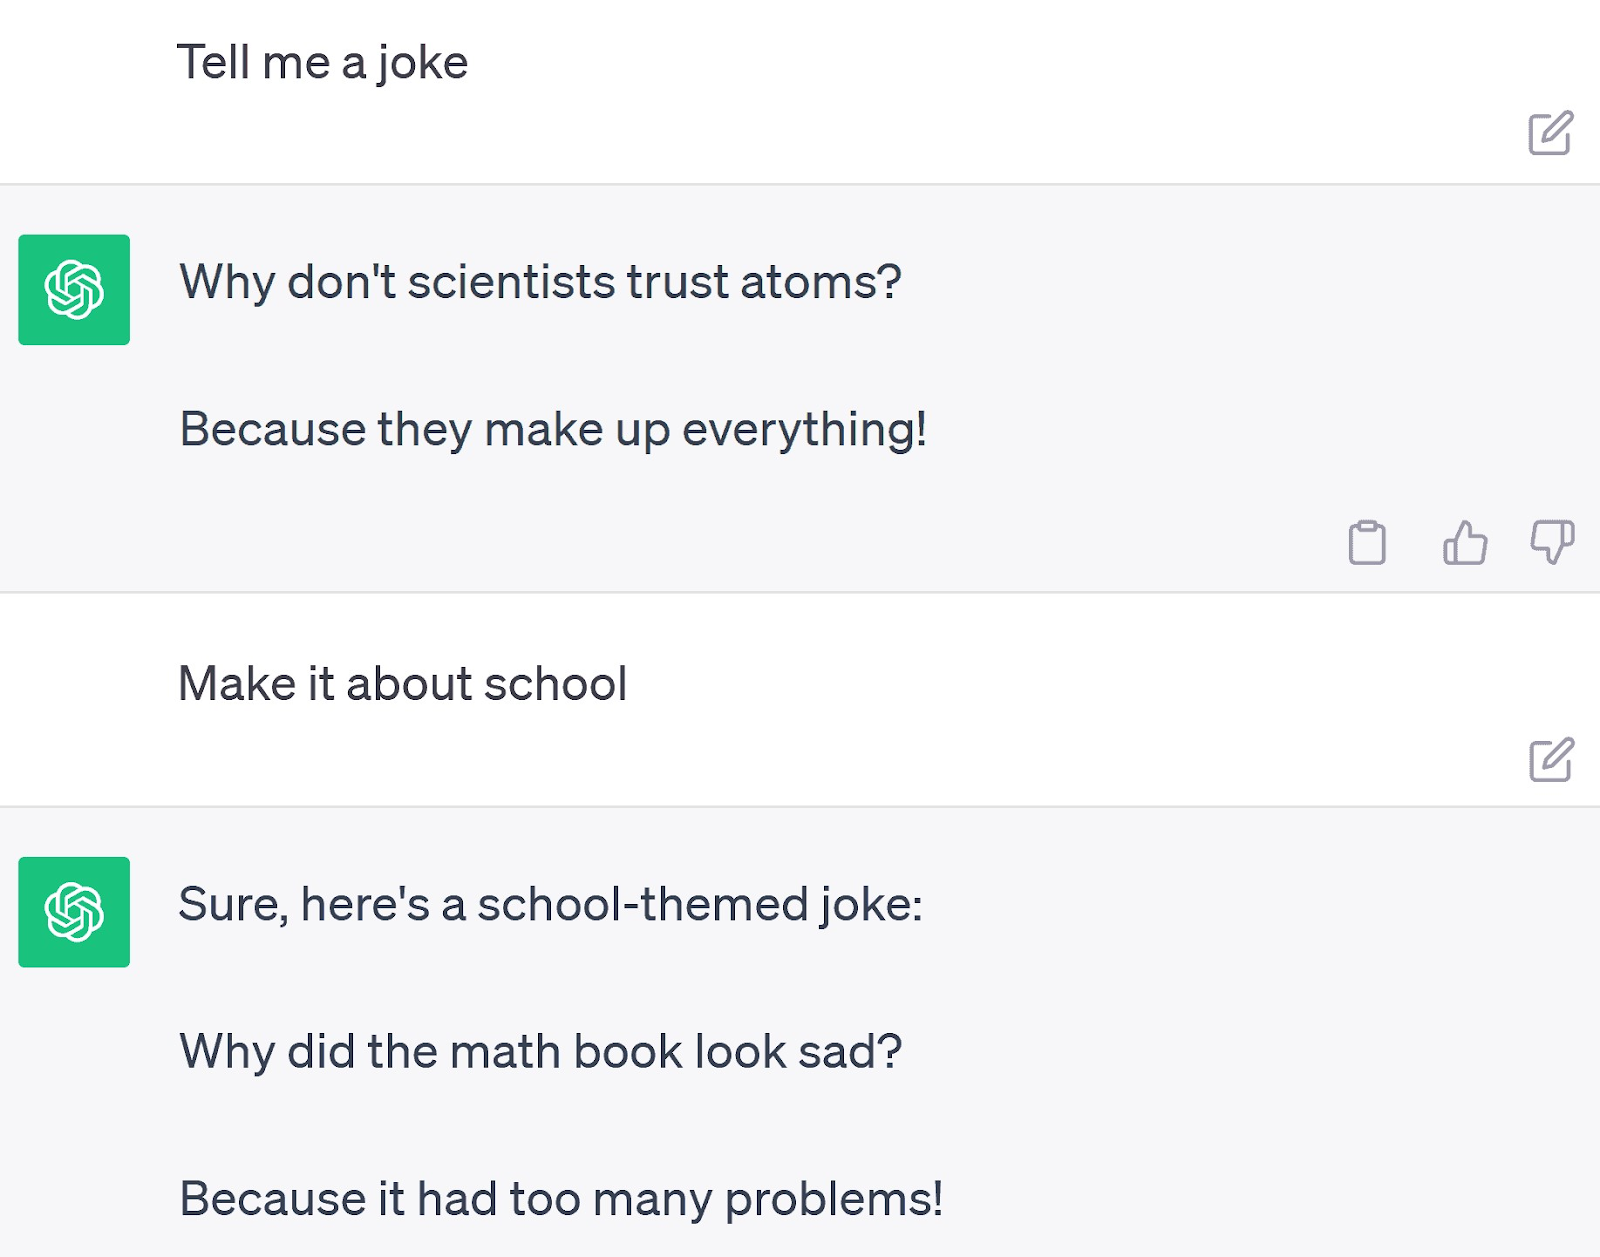 A prompt asking ChatGPT to tell a joke about school